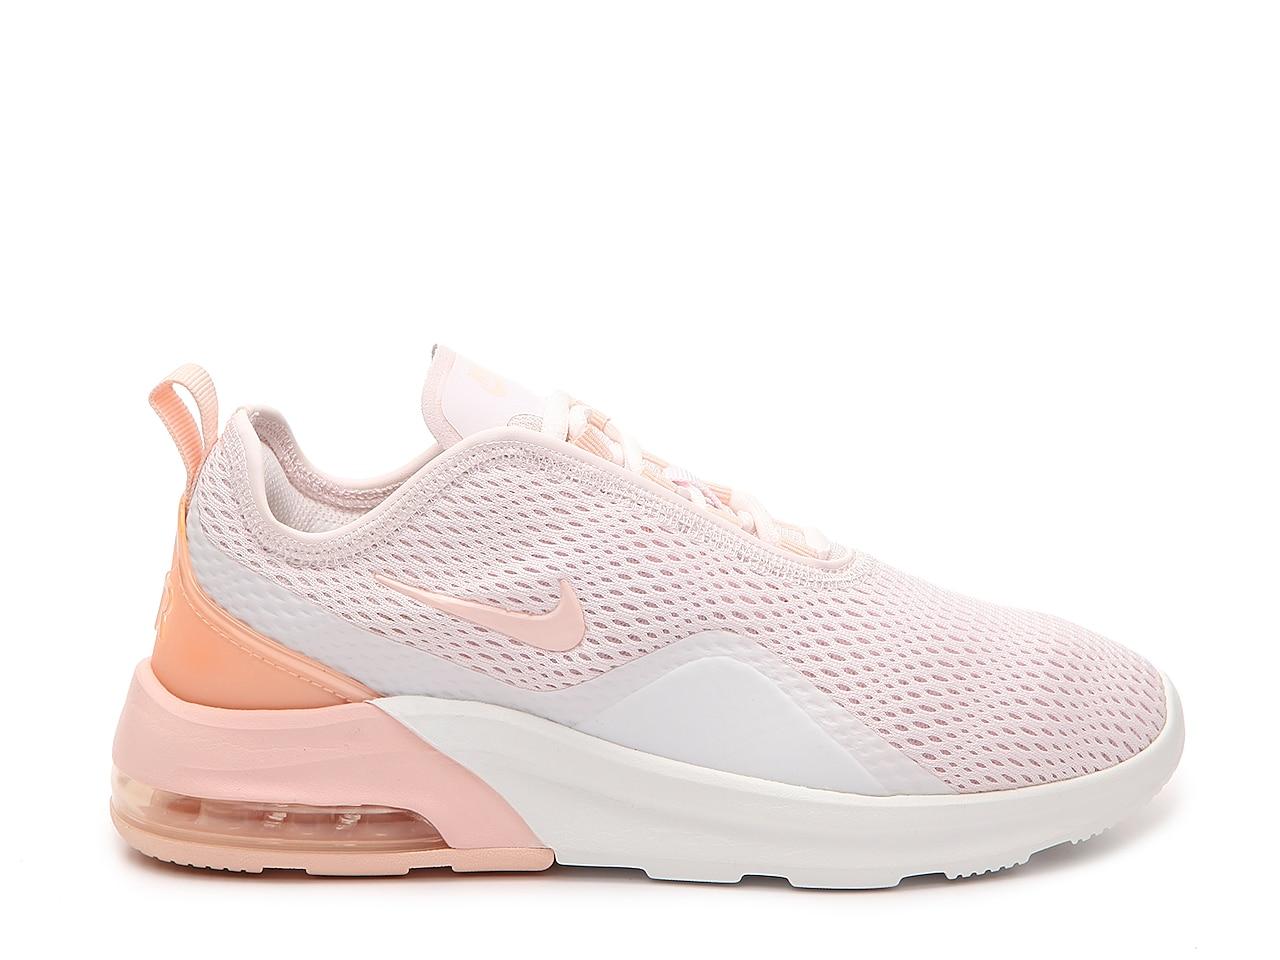 Nike Synthetic Air Max Motion 2 Sneaker in Pale Pink/White (Pink) | Lyst